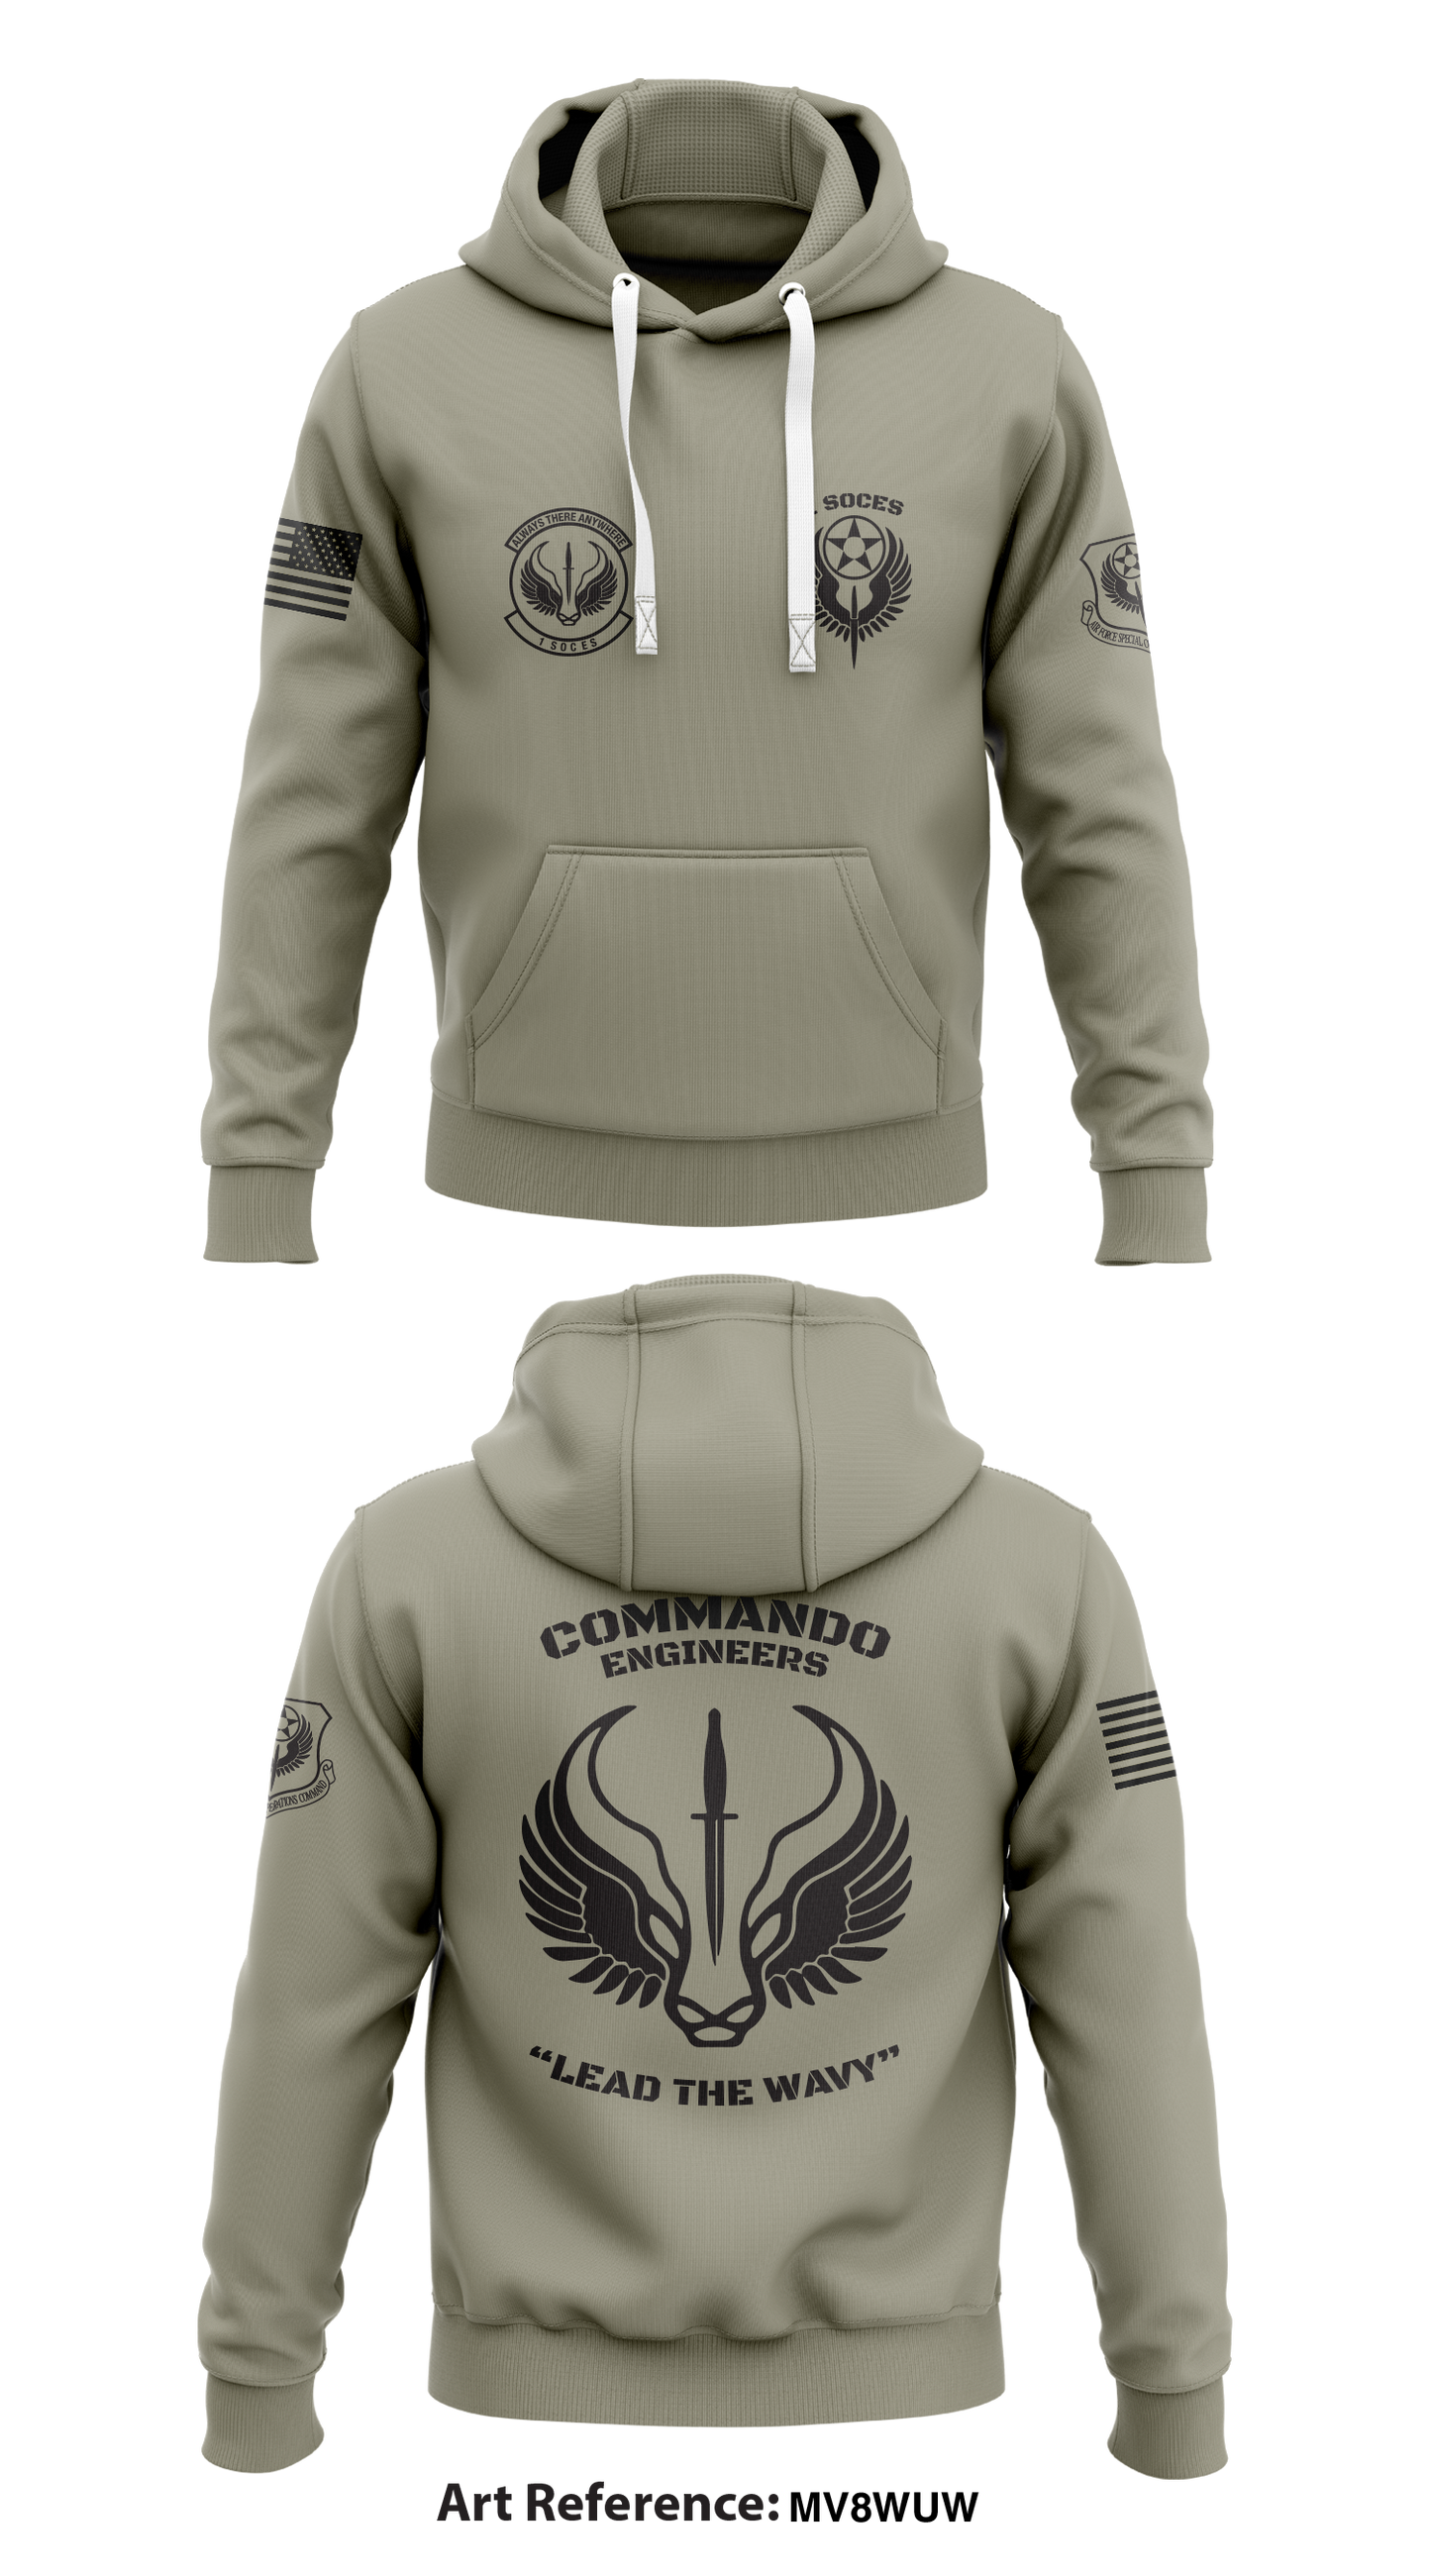 1st Special Operations Civil Engineering Squadron Store 1 Core Men's Hooded Performance Sweatshirt - Mv8wUW